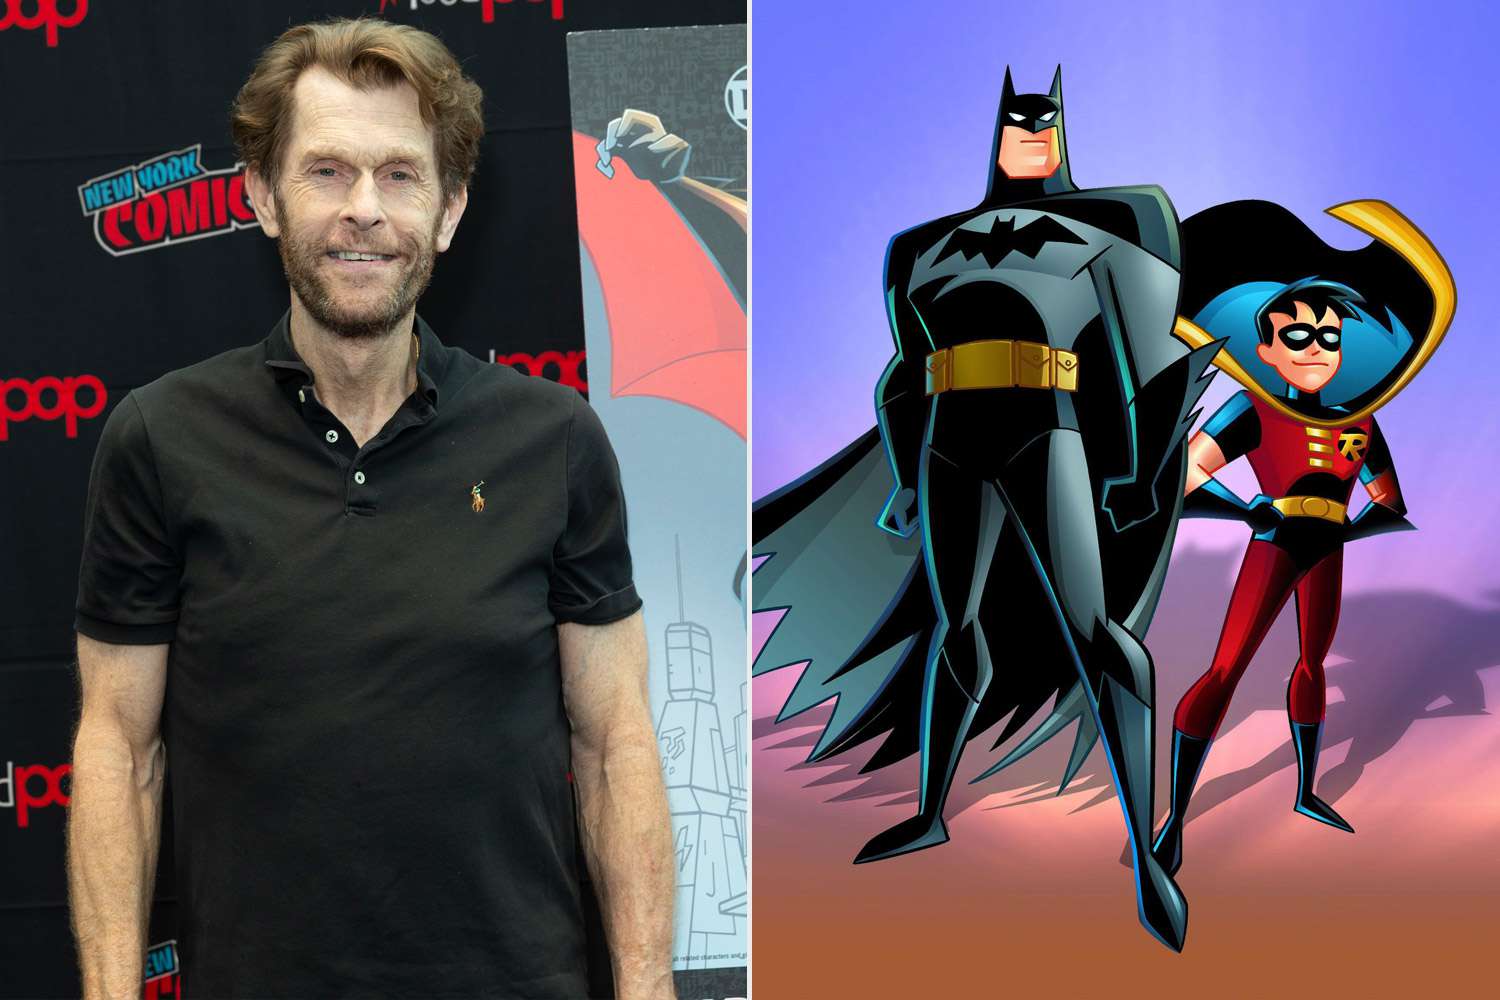 NEW YORK, UNITED STATES - 2019/10/06: Kevin Conroy attends presser for Batman Beyond 20th Anniversary by Warner Brothers during New York Comic Con at Jacob Javits Center. (Photo by Lev Radin/Pacific Press/LightRocket via Getty Images); 2H97KP4 BATMAN: THE ANIMATED SERIES (1992), directed by BOYD KIRKLAND, BRUCE W. TIMM and ERIC RADOMSKI. Credit: WARNER BROS. ANIMATION / Album